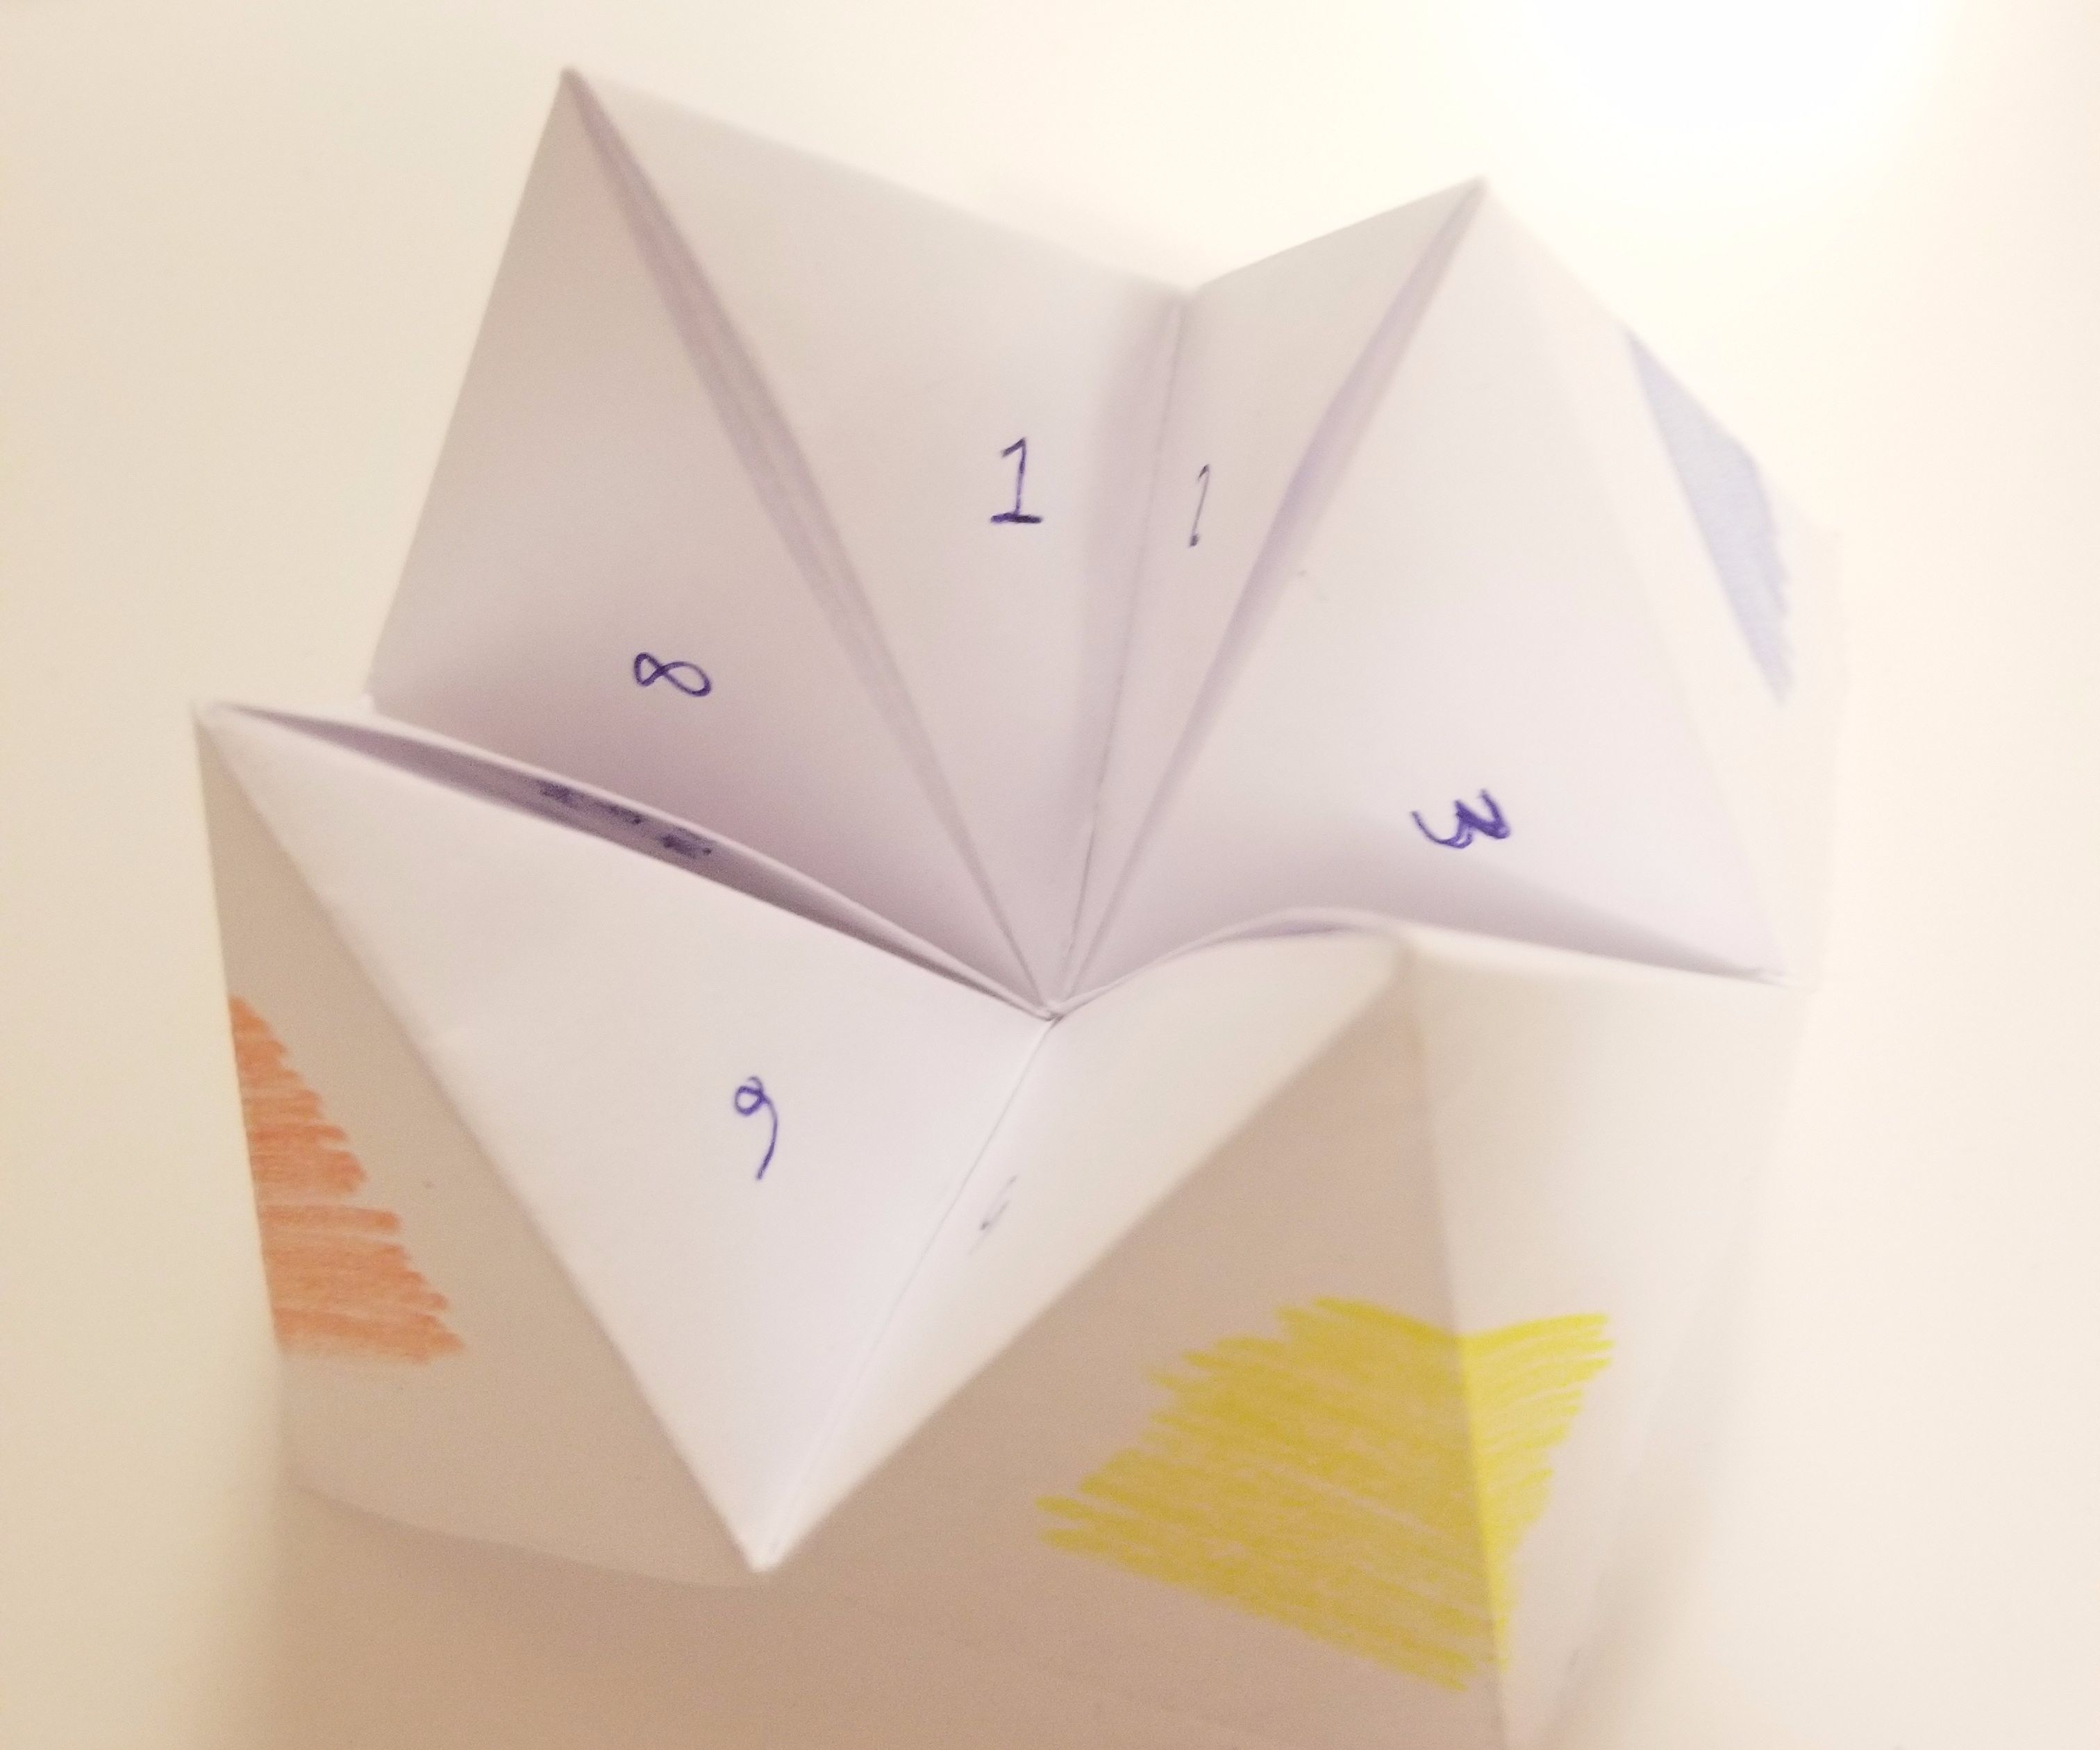 How To Make Fortune Teller Origami Origami Fortune Teller 16 Steps With Pictures